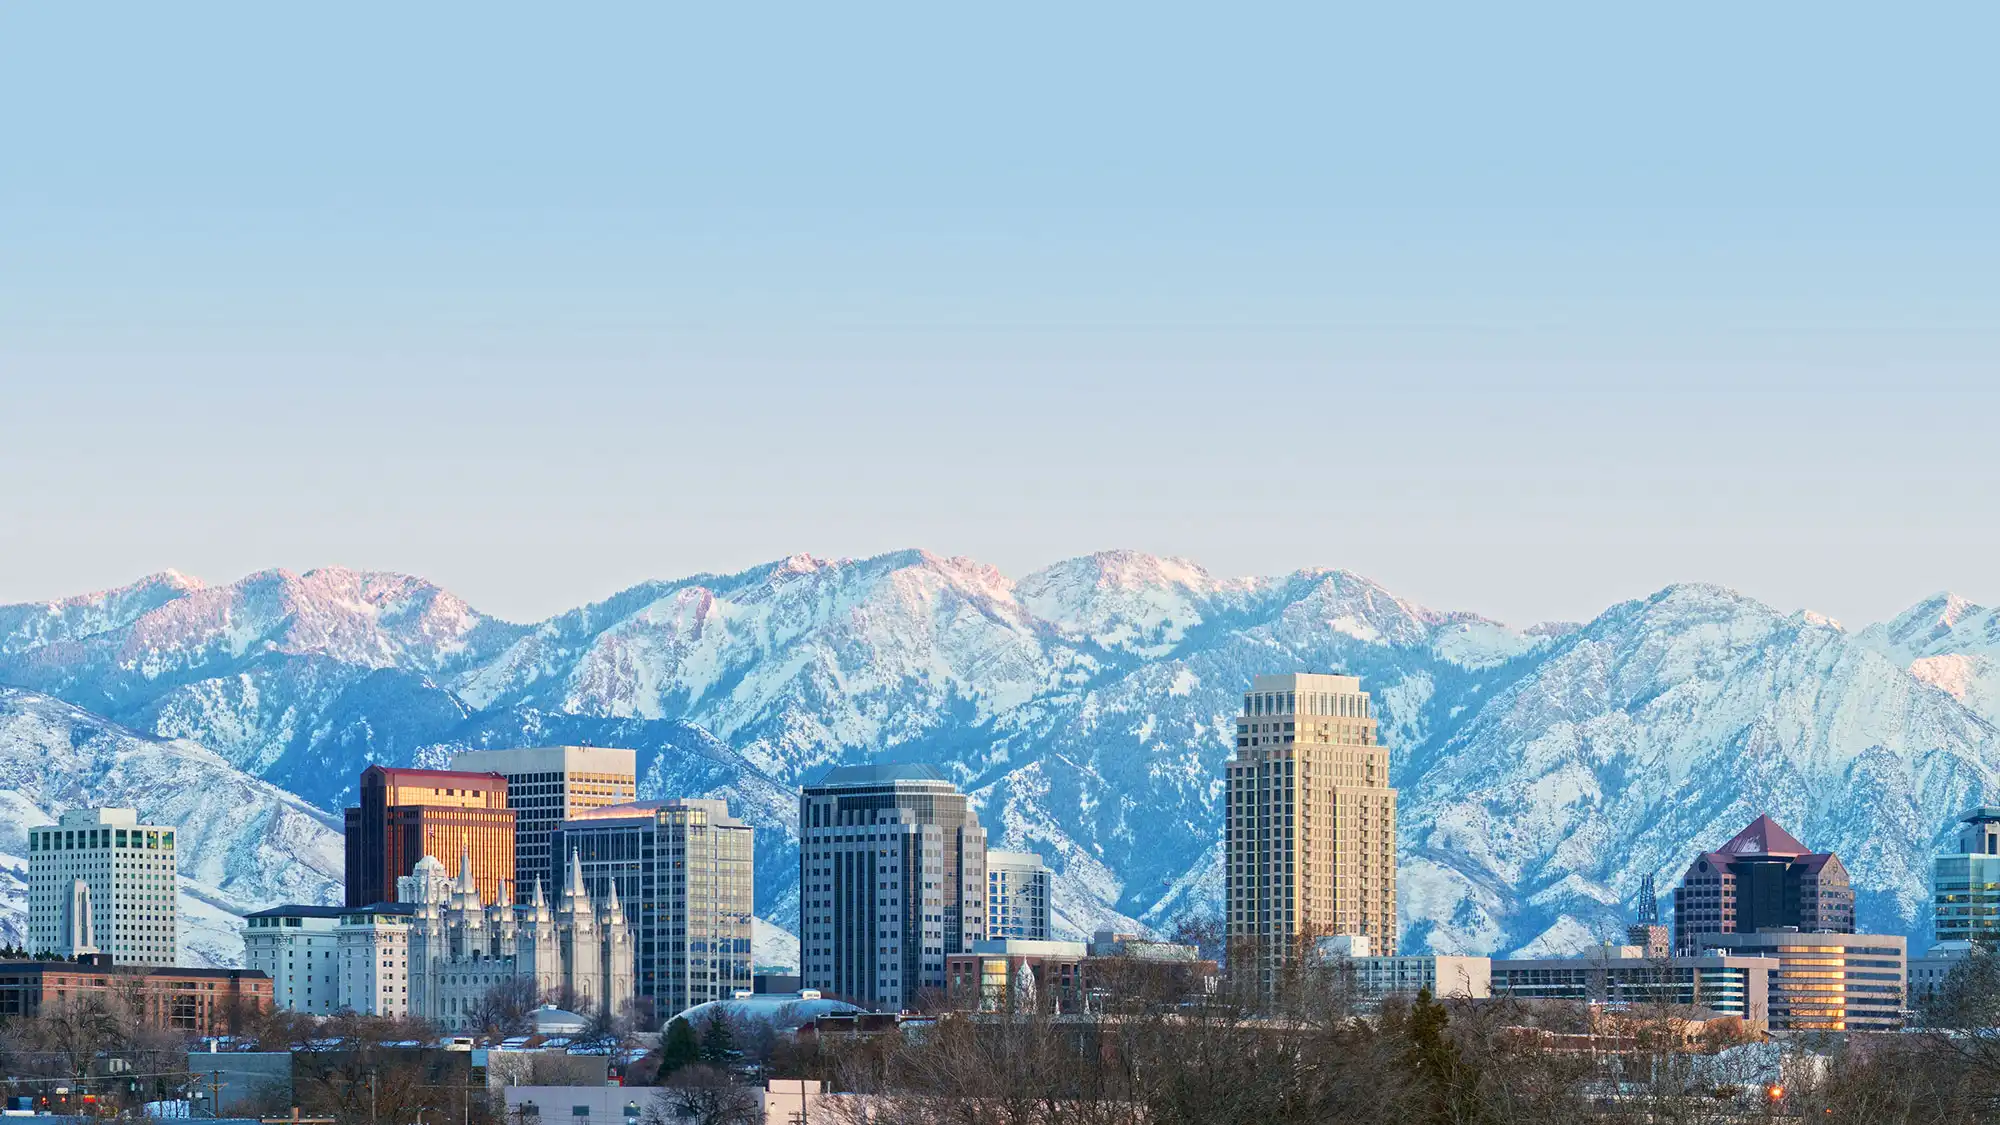 Panoramic view of Salt Lake City skyline with Utah State Capitol and the snow-covered Wasatch Mountain Range in the background during twilight.